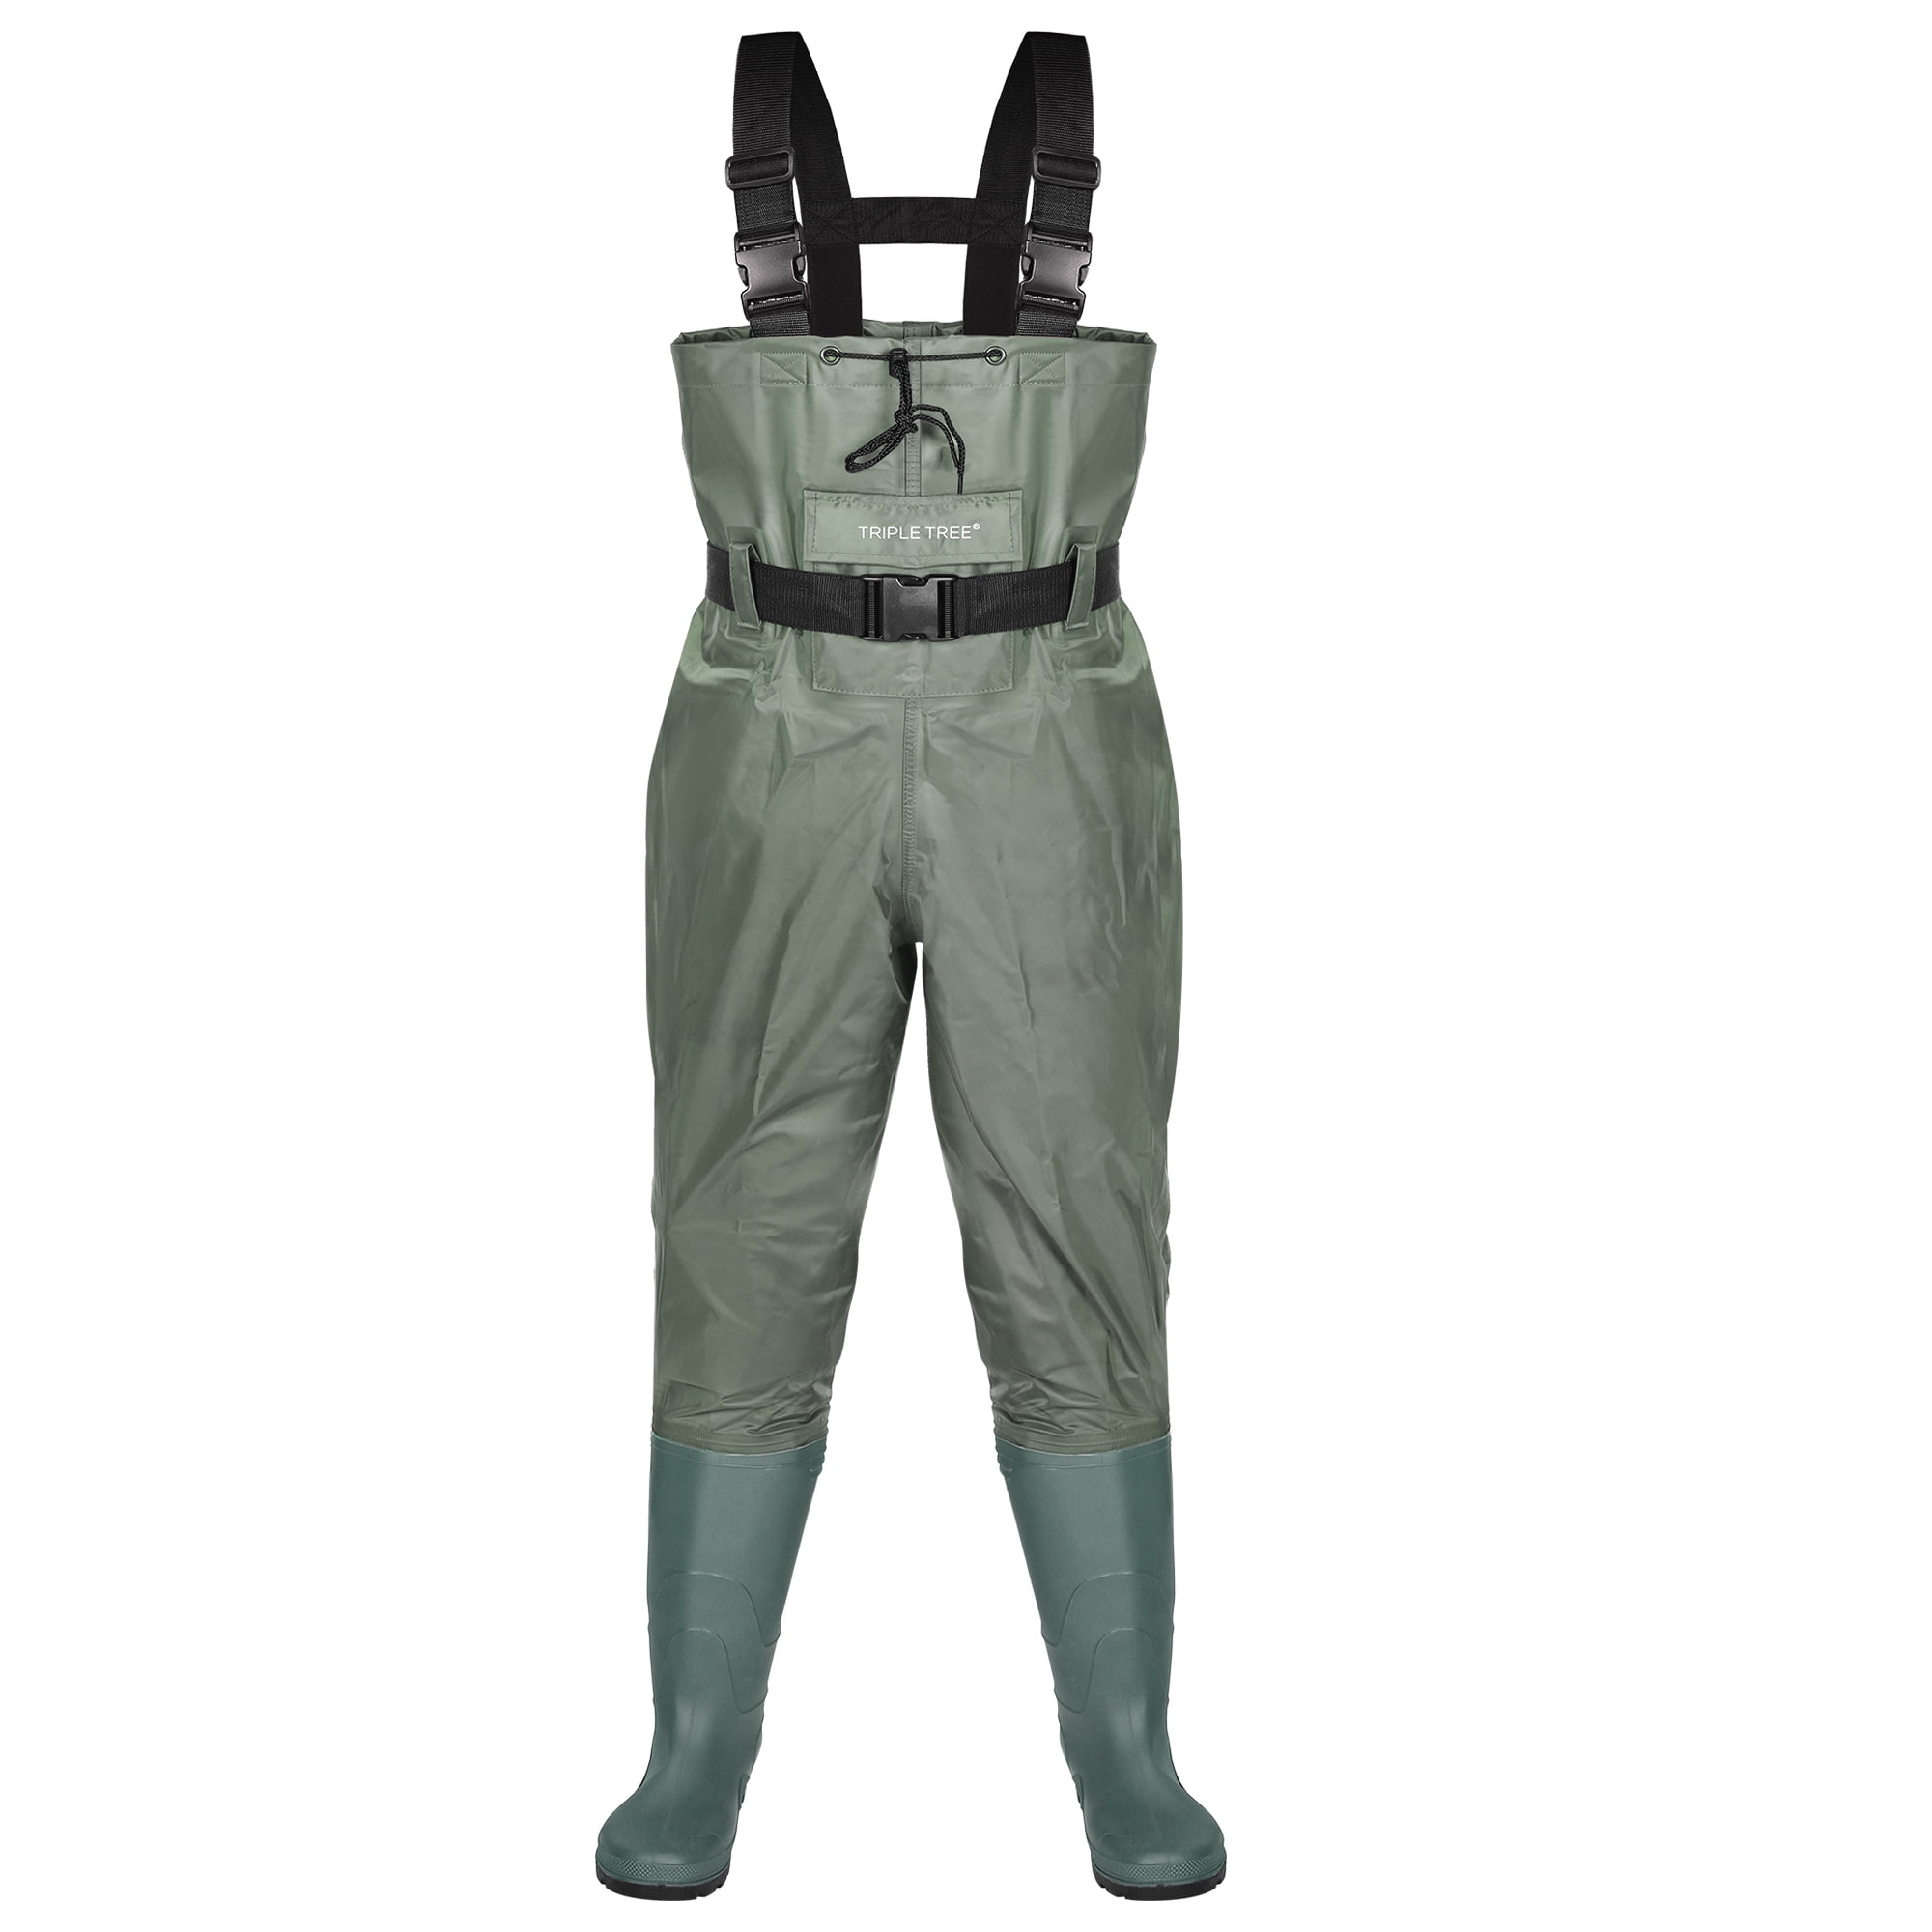 Frogg Toggs Rana II PVC Bootfoot Cleated Chest Waders Sizes 7-13 #2715249 